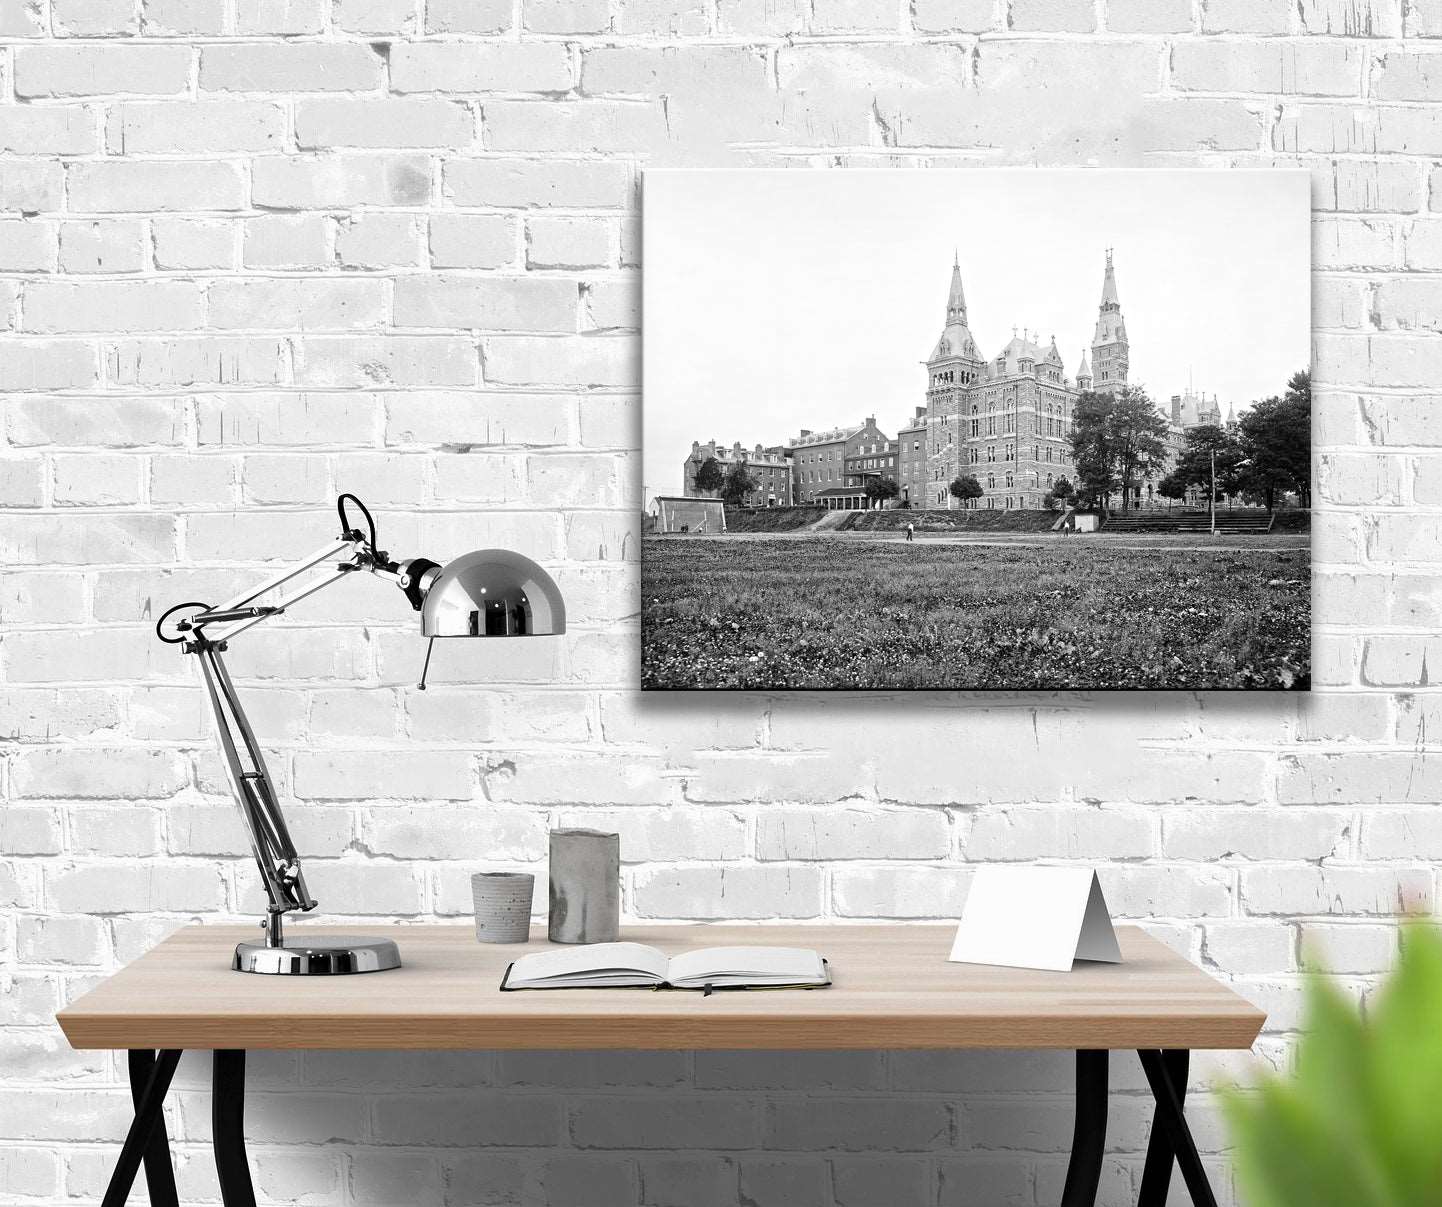 A canvas print of a vintage photograph of Georgetown University hanging on a brick wall above a desk